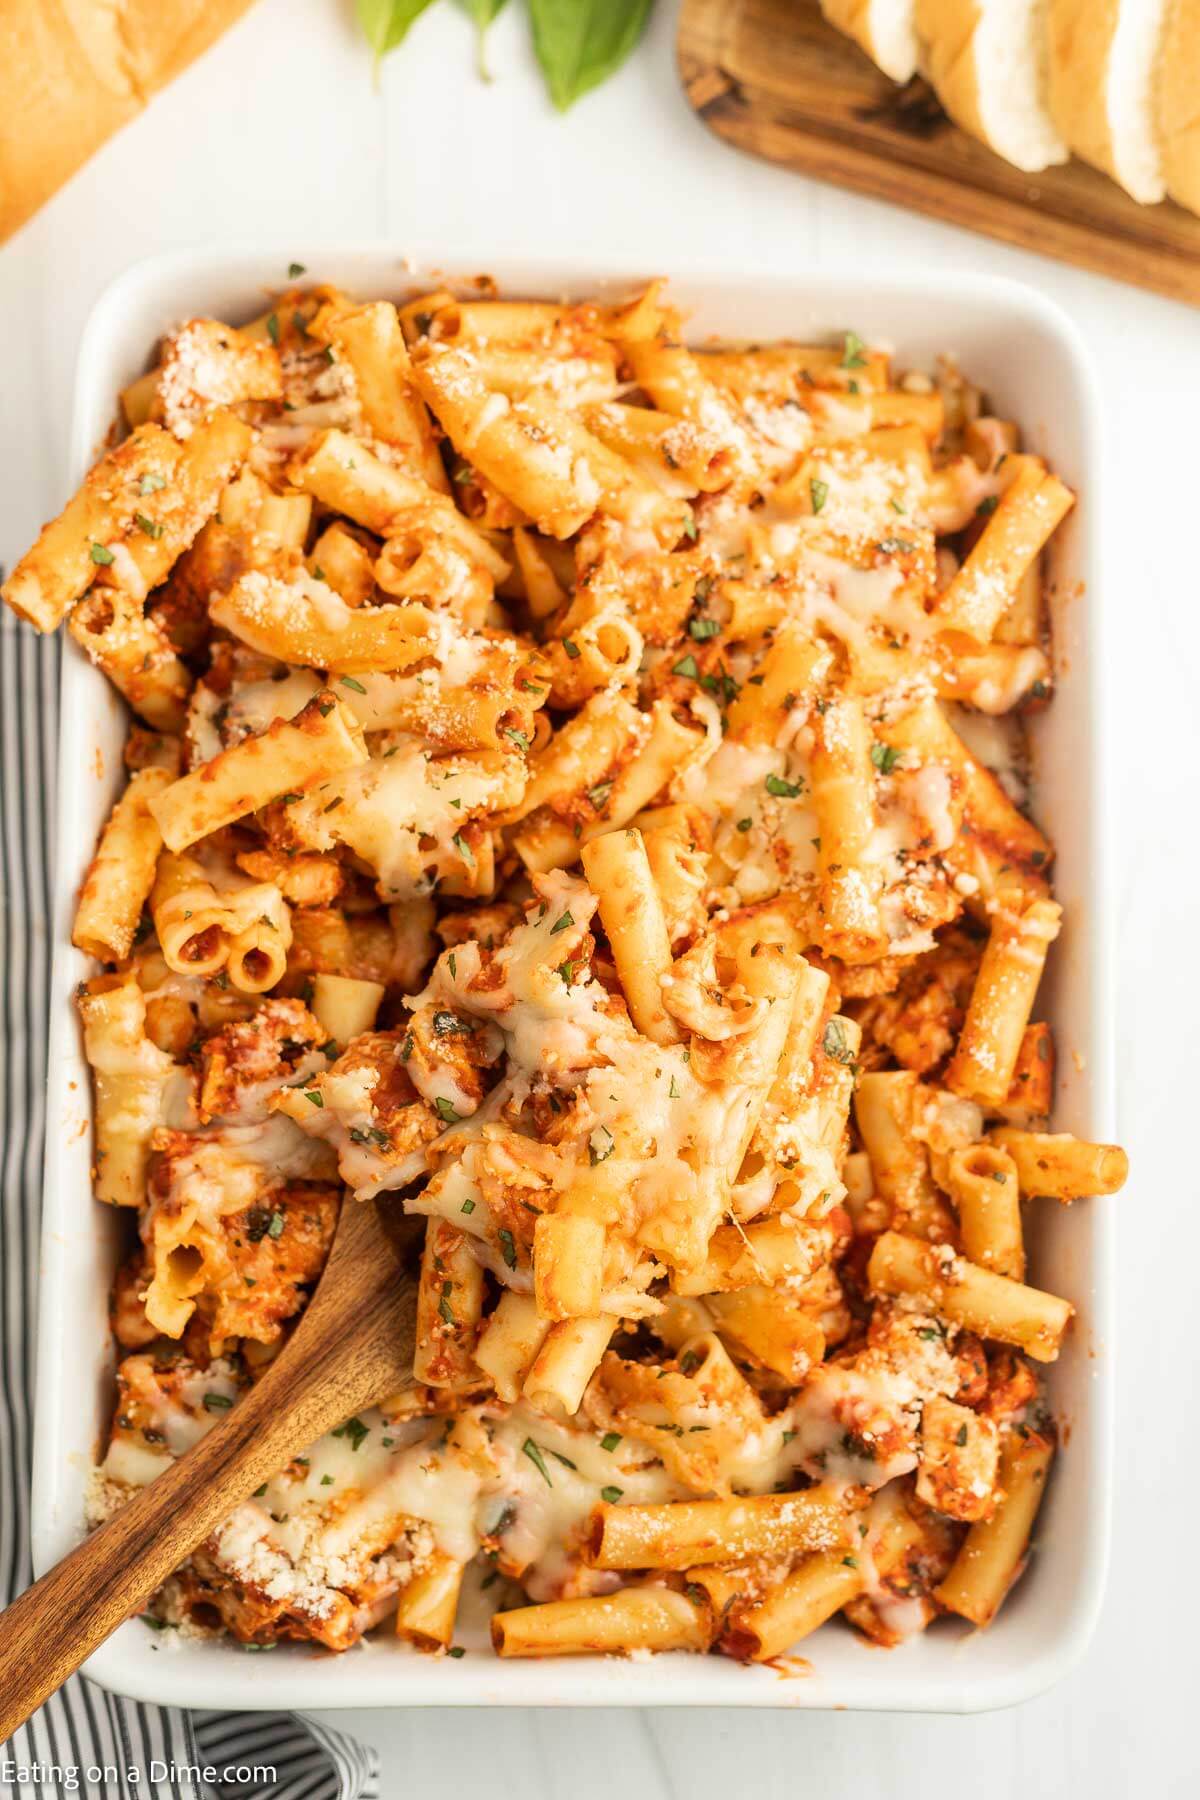 Baked Ziti in a casserole dish with a wooden spoon